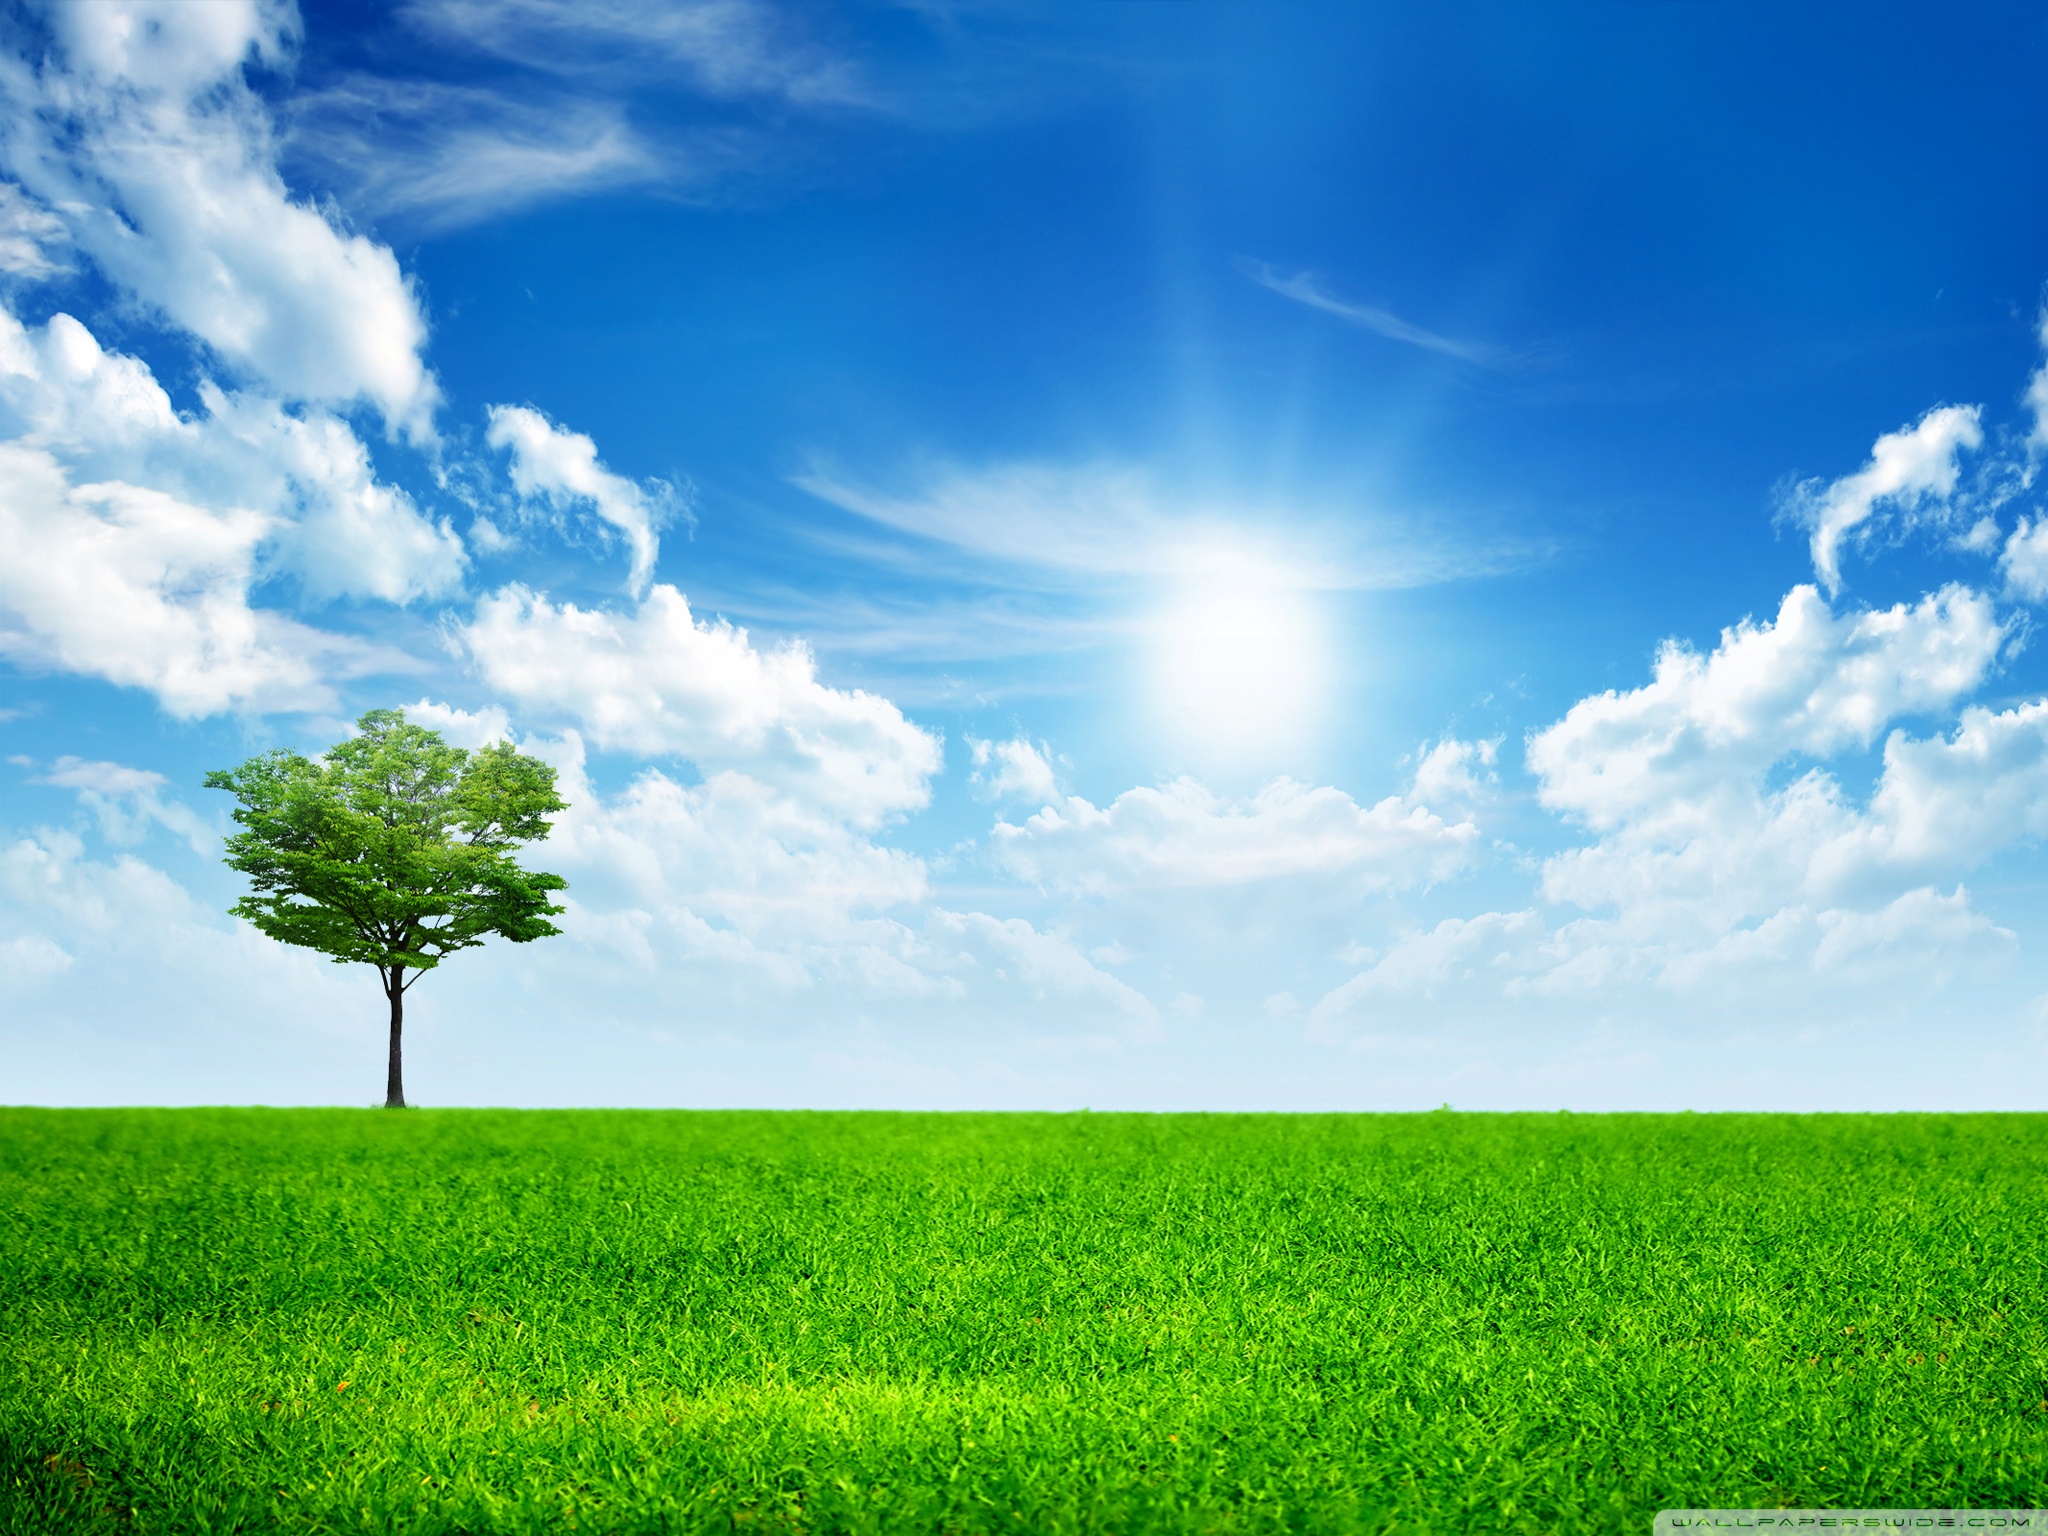 Green Nature Ultra HD Desktop Background Wallpaper for: Multi Display, Dual Monitor, Tablet